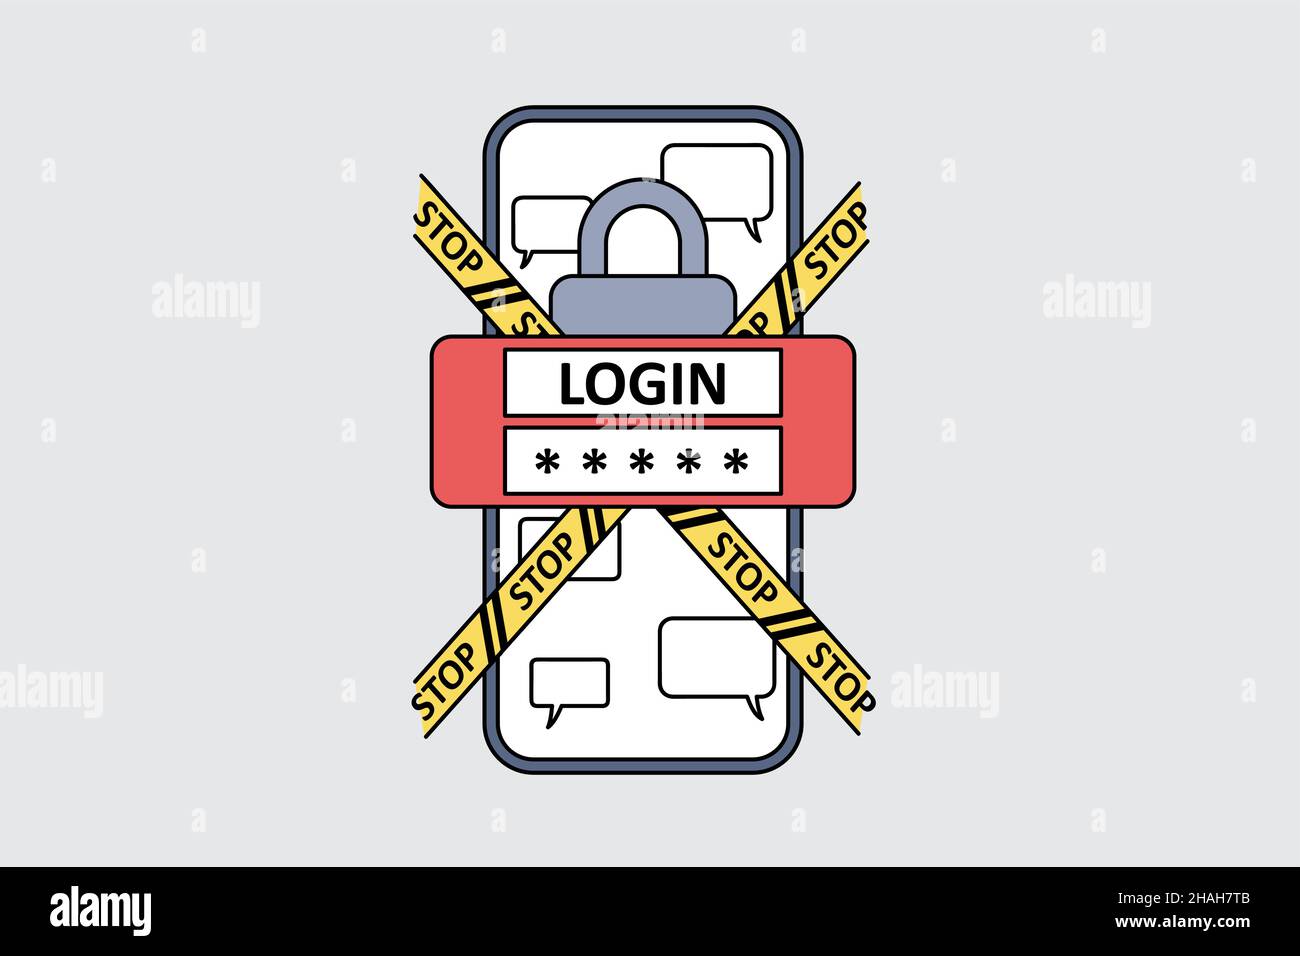 Personal identification and safety concept. Smartphone screen with login password and stop signs crossing it with lock and chat messages in application vector illustration  Stock Vector